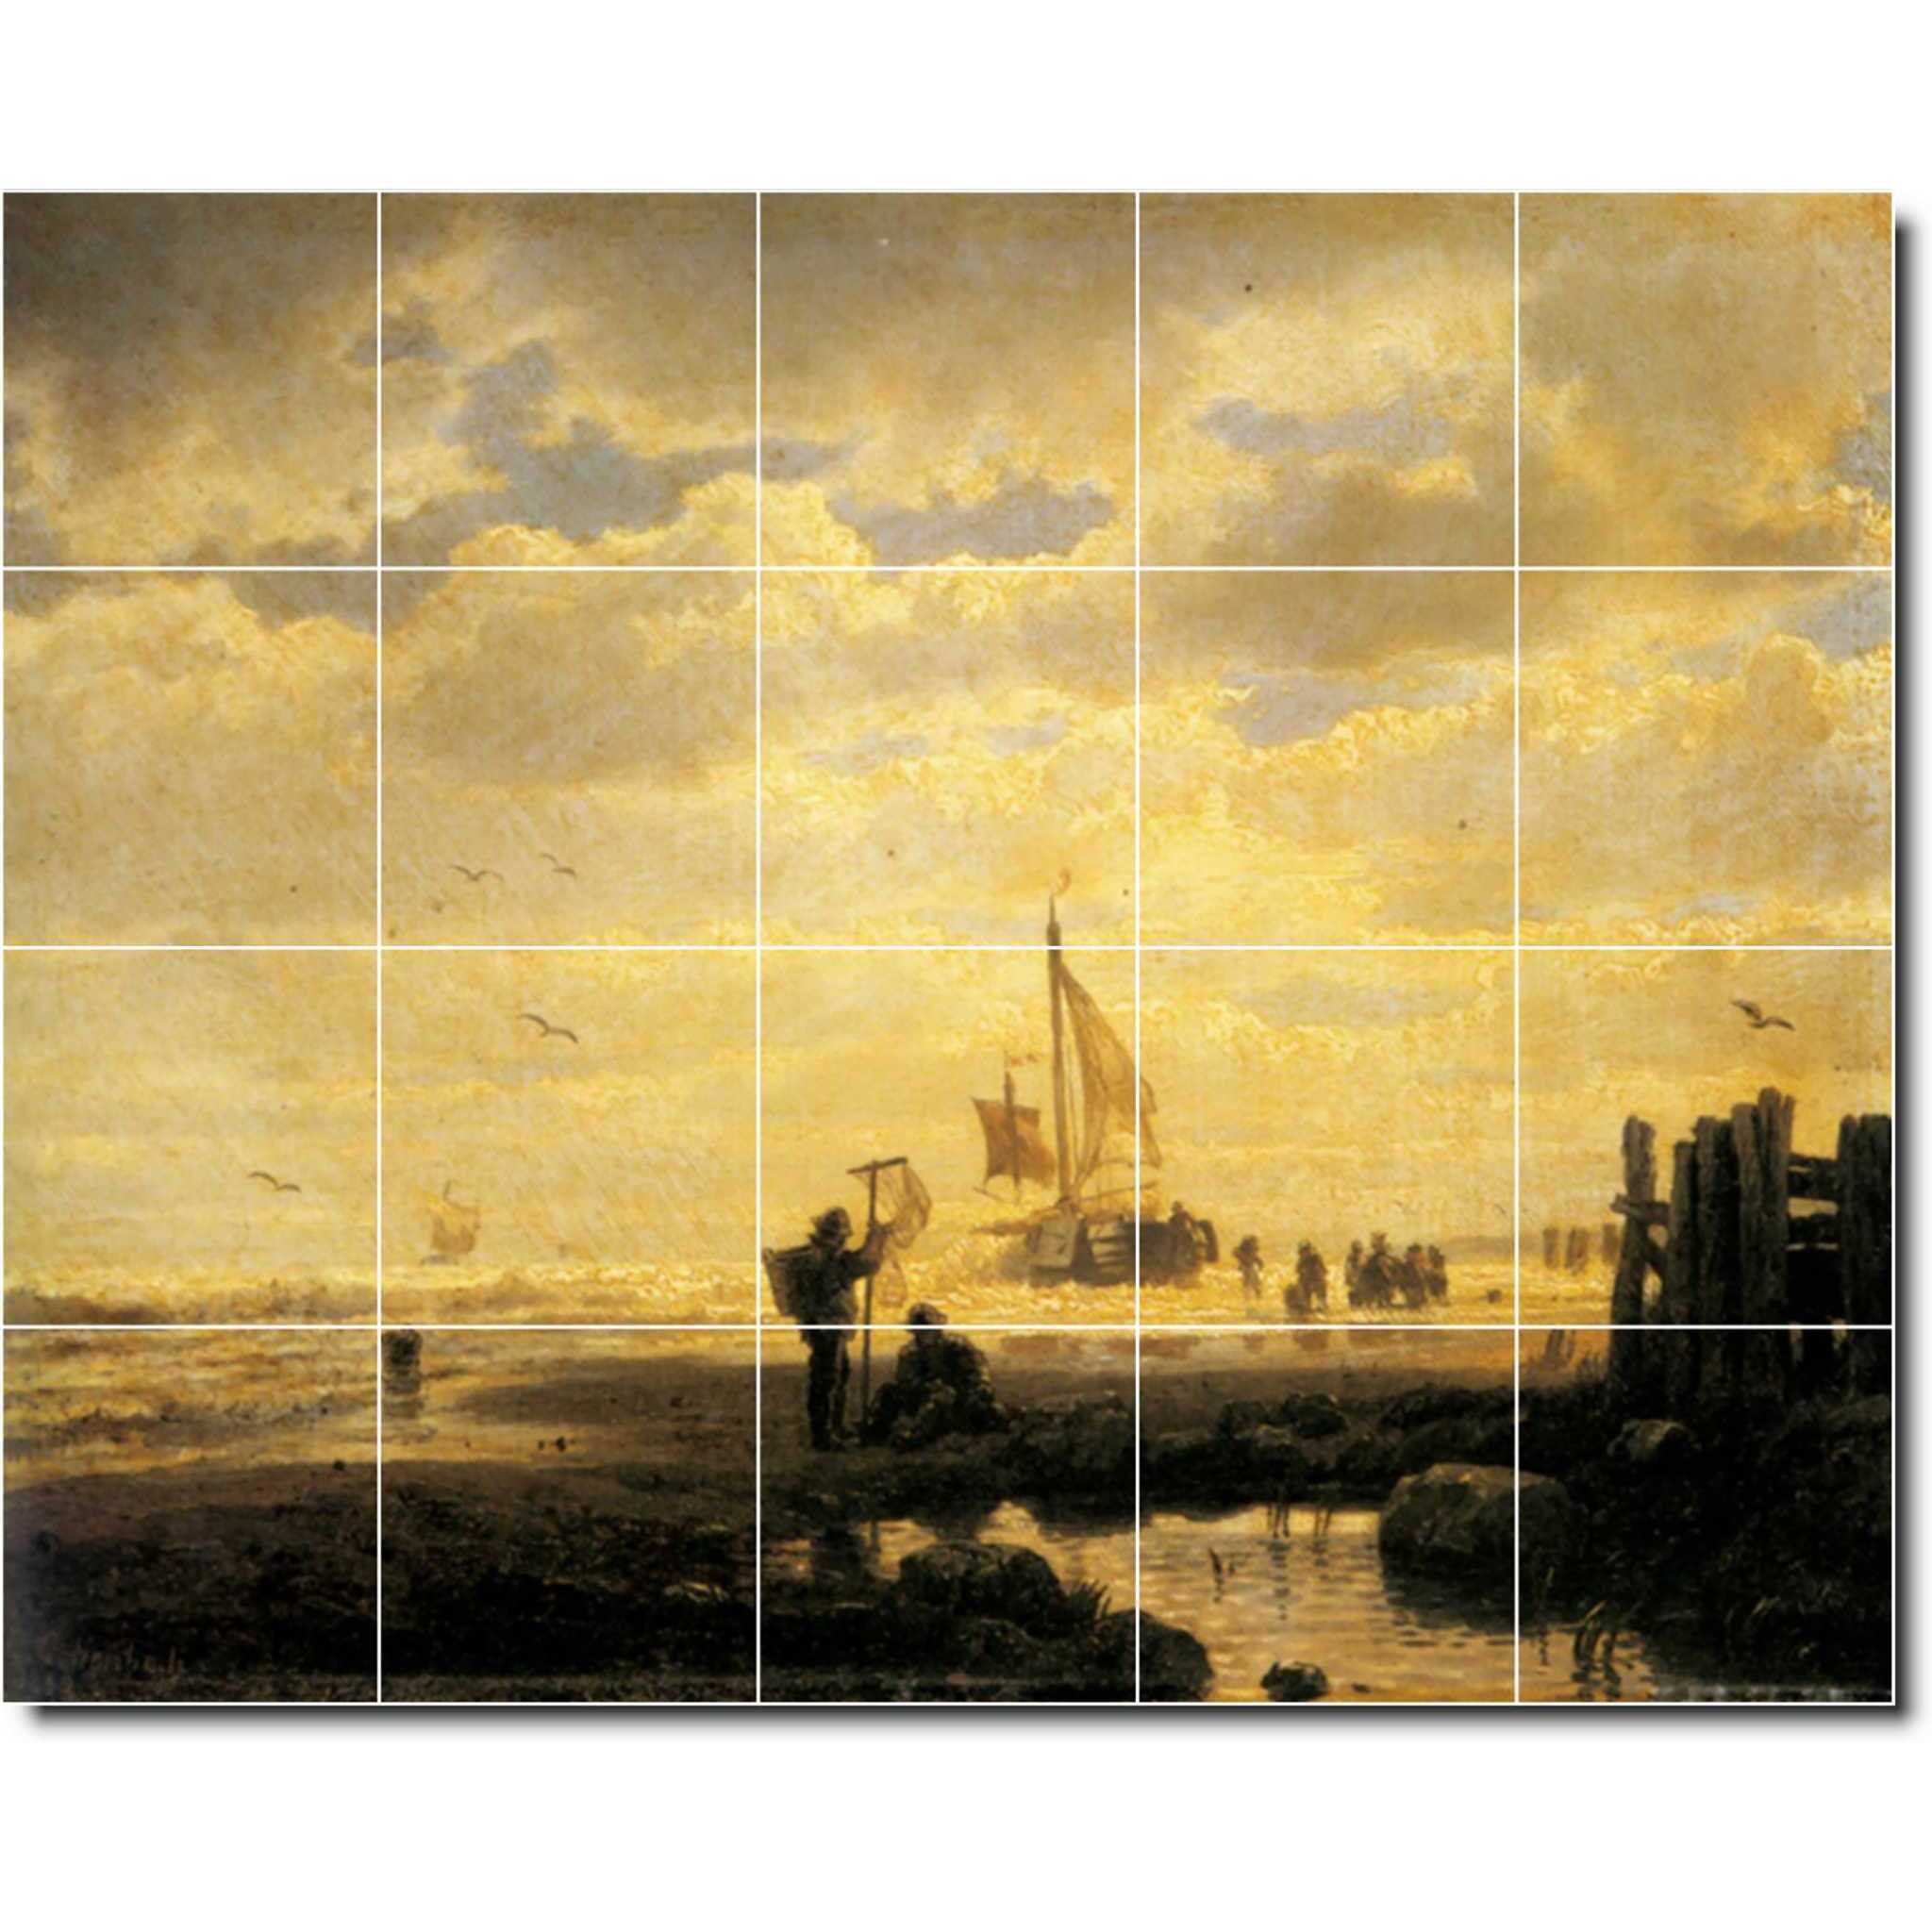 andreas achenbach waterfront painting ceramic tile mural p00005